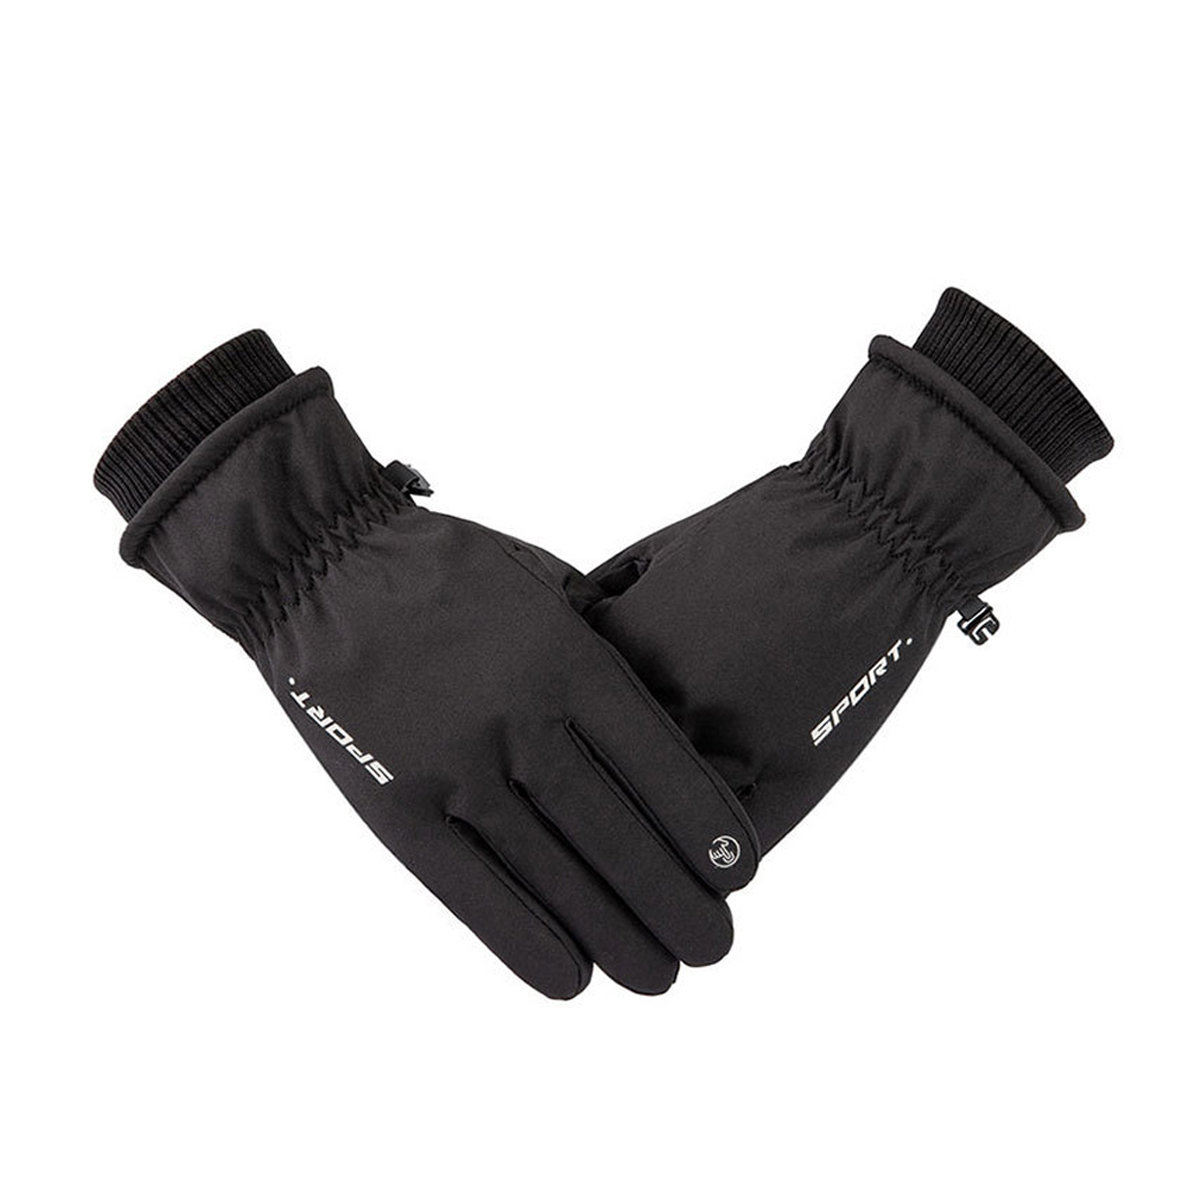 Winter Warm Thermal Touch Screen Gloves Ski Snow Snowboard Cycling Touchscreen Waterproof